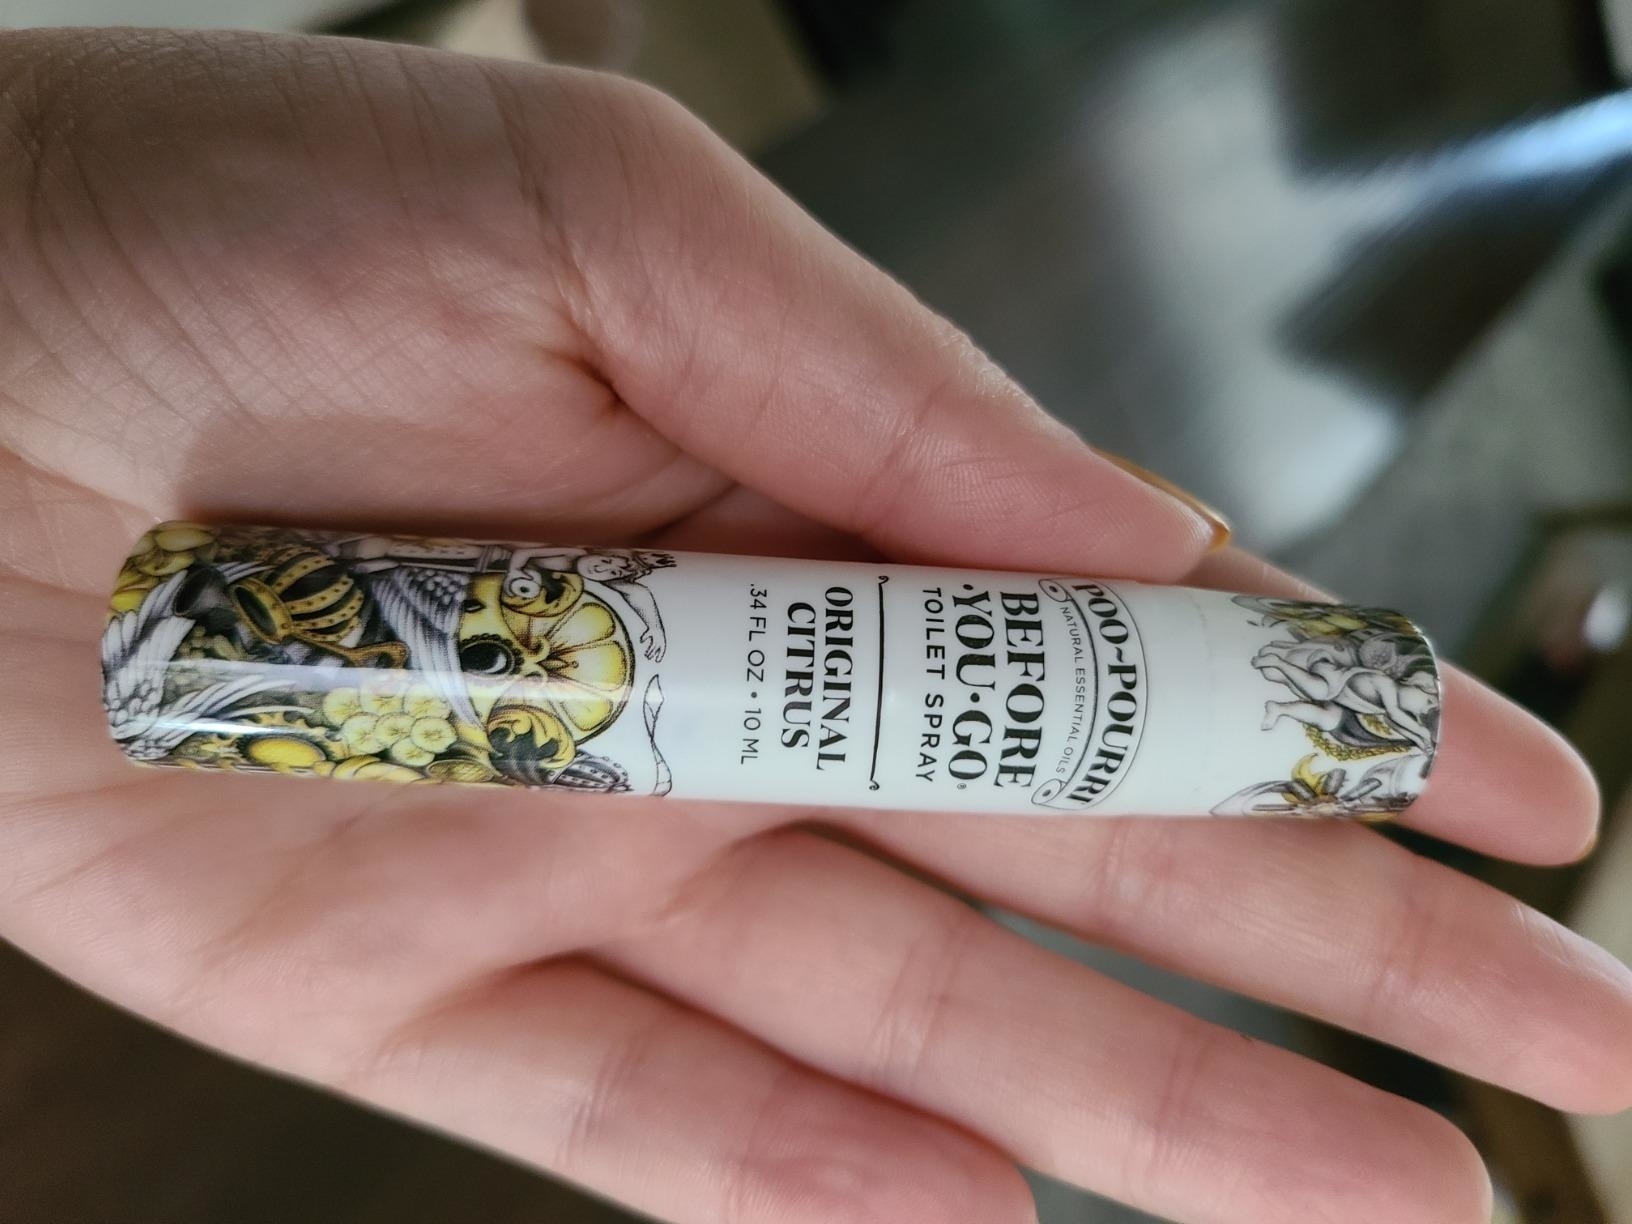 Reviewer&#x27;s photo of their hand holding the Poo-Pourri spray